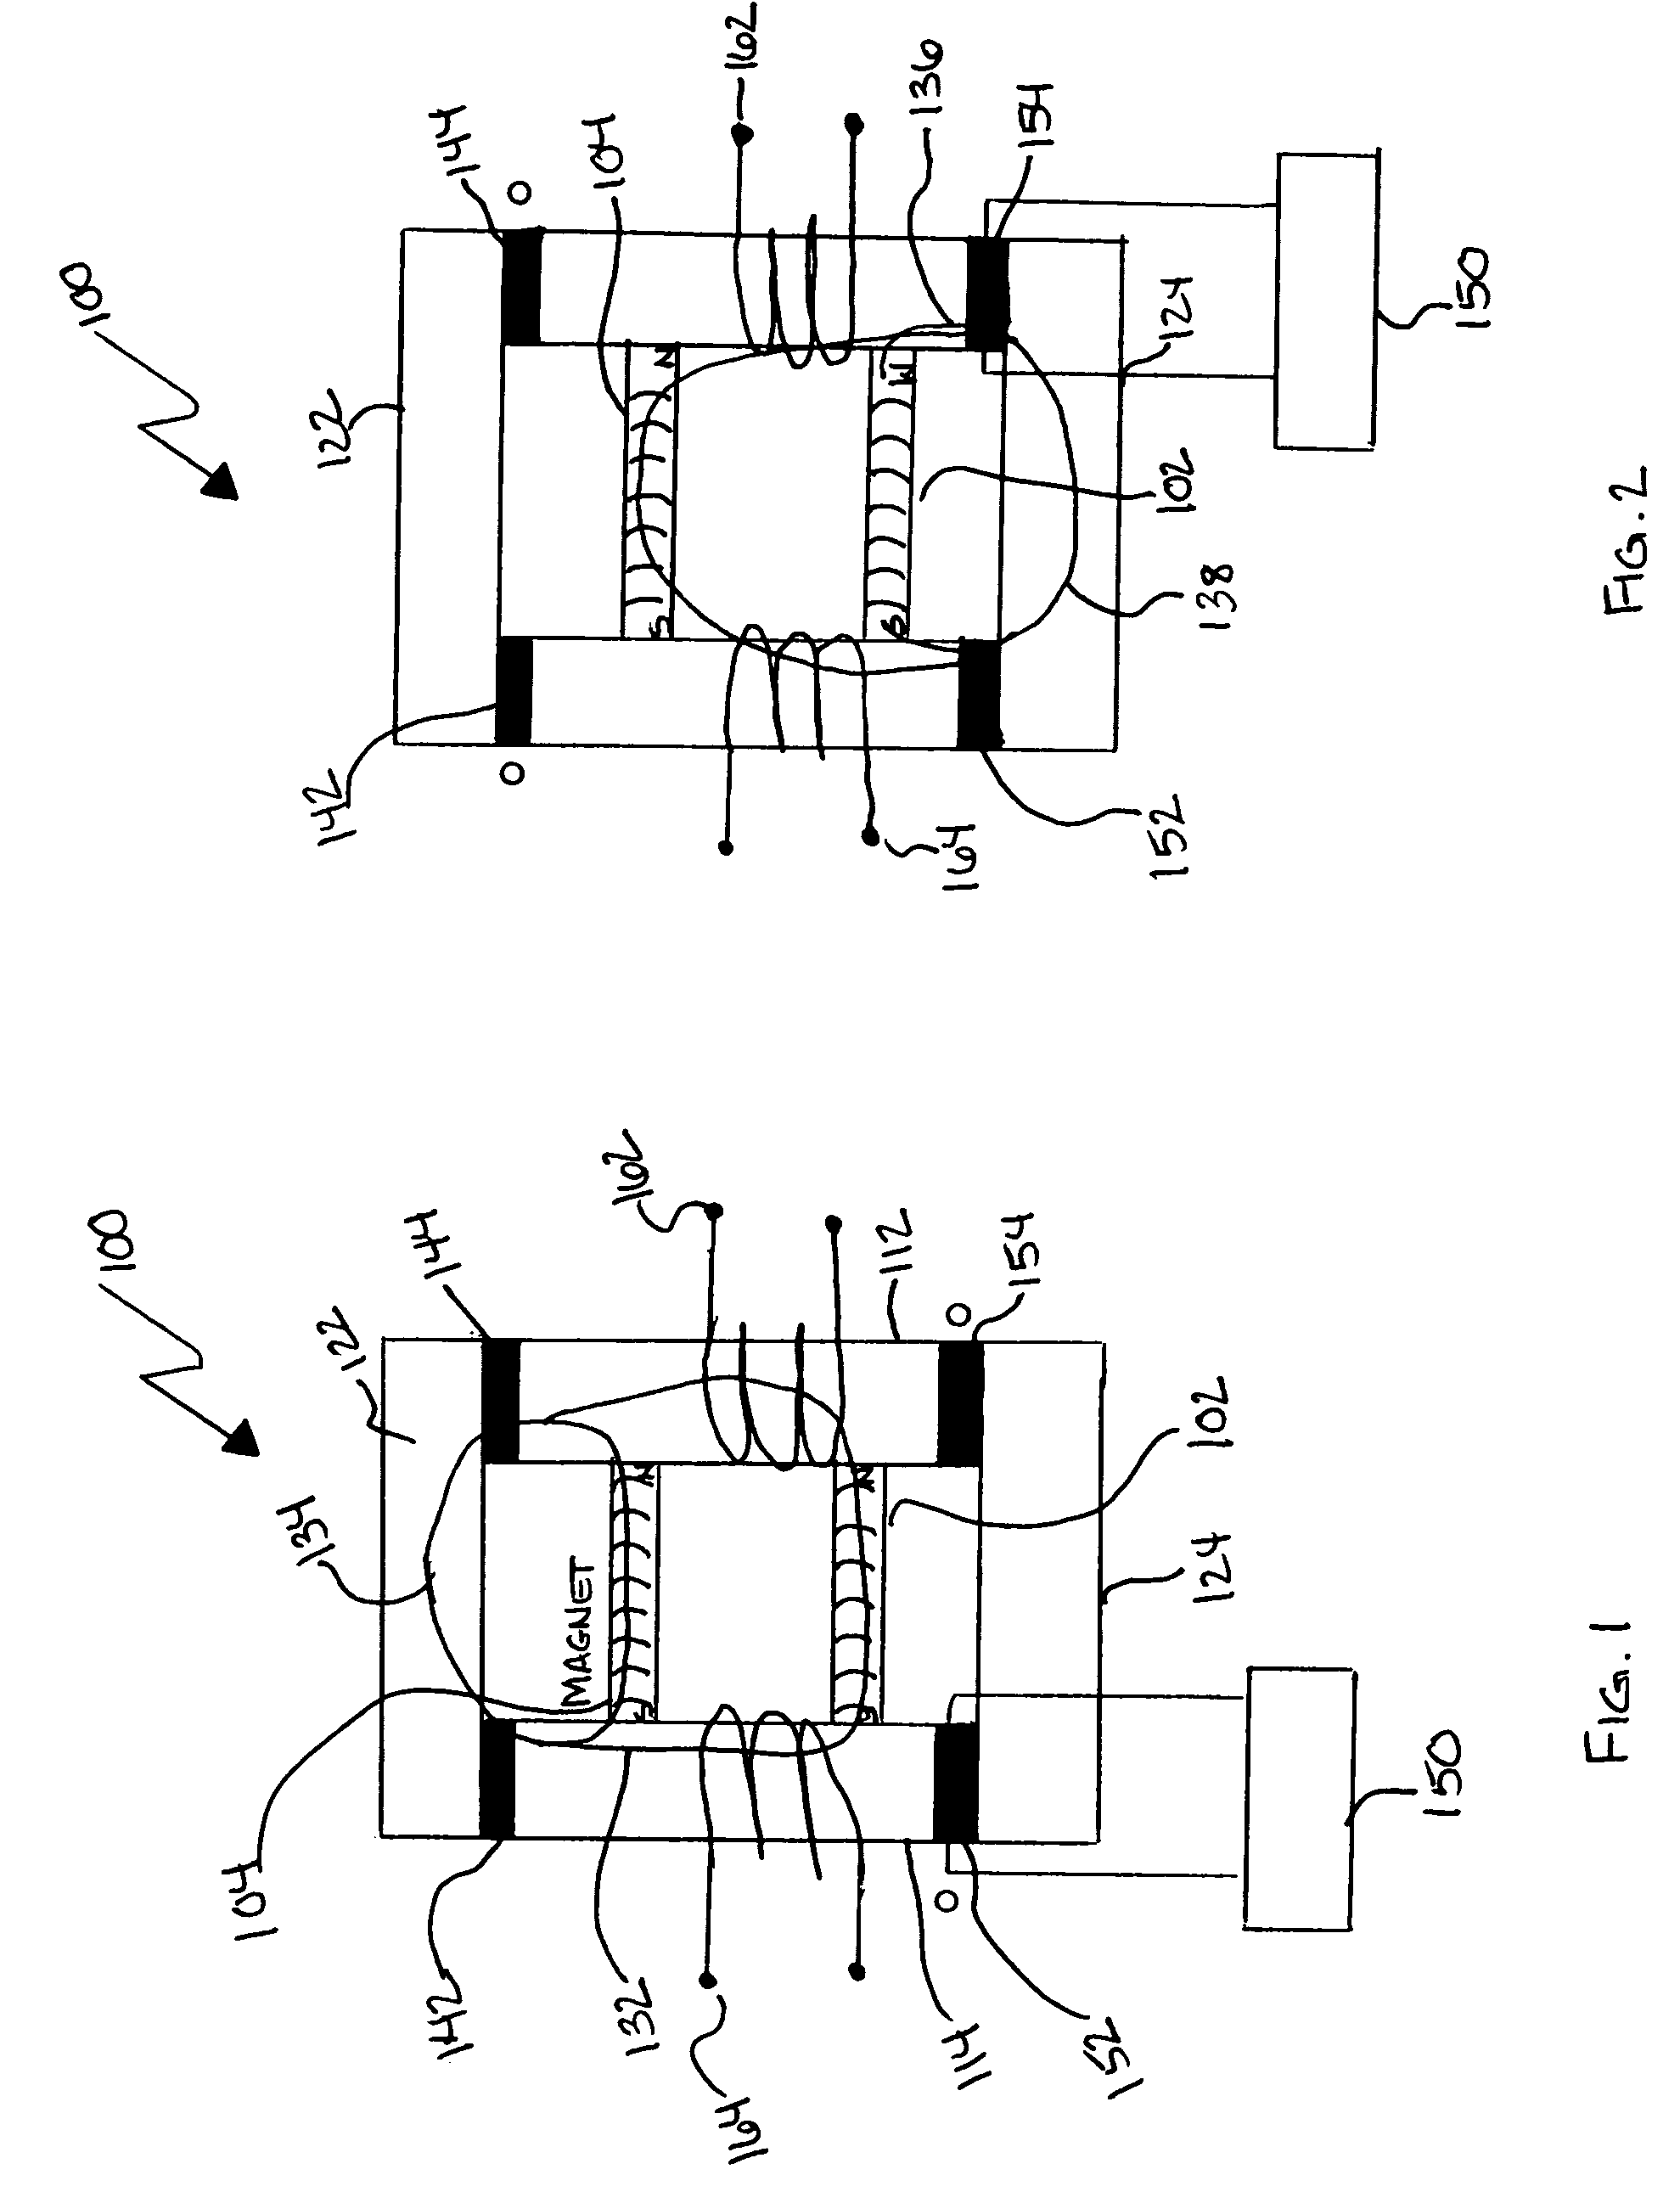 Method and apparatus for coil-less magnetoelectric magnetic flux switching for permanent magnets